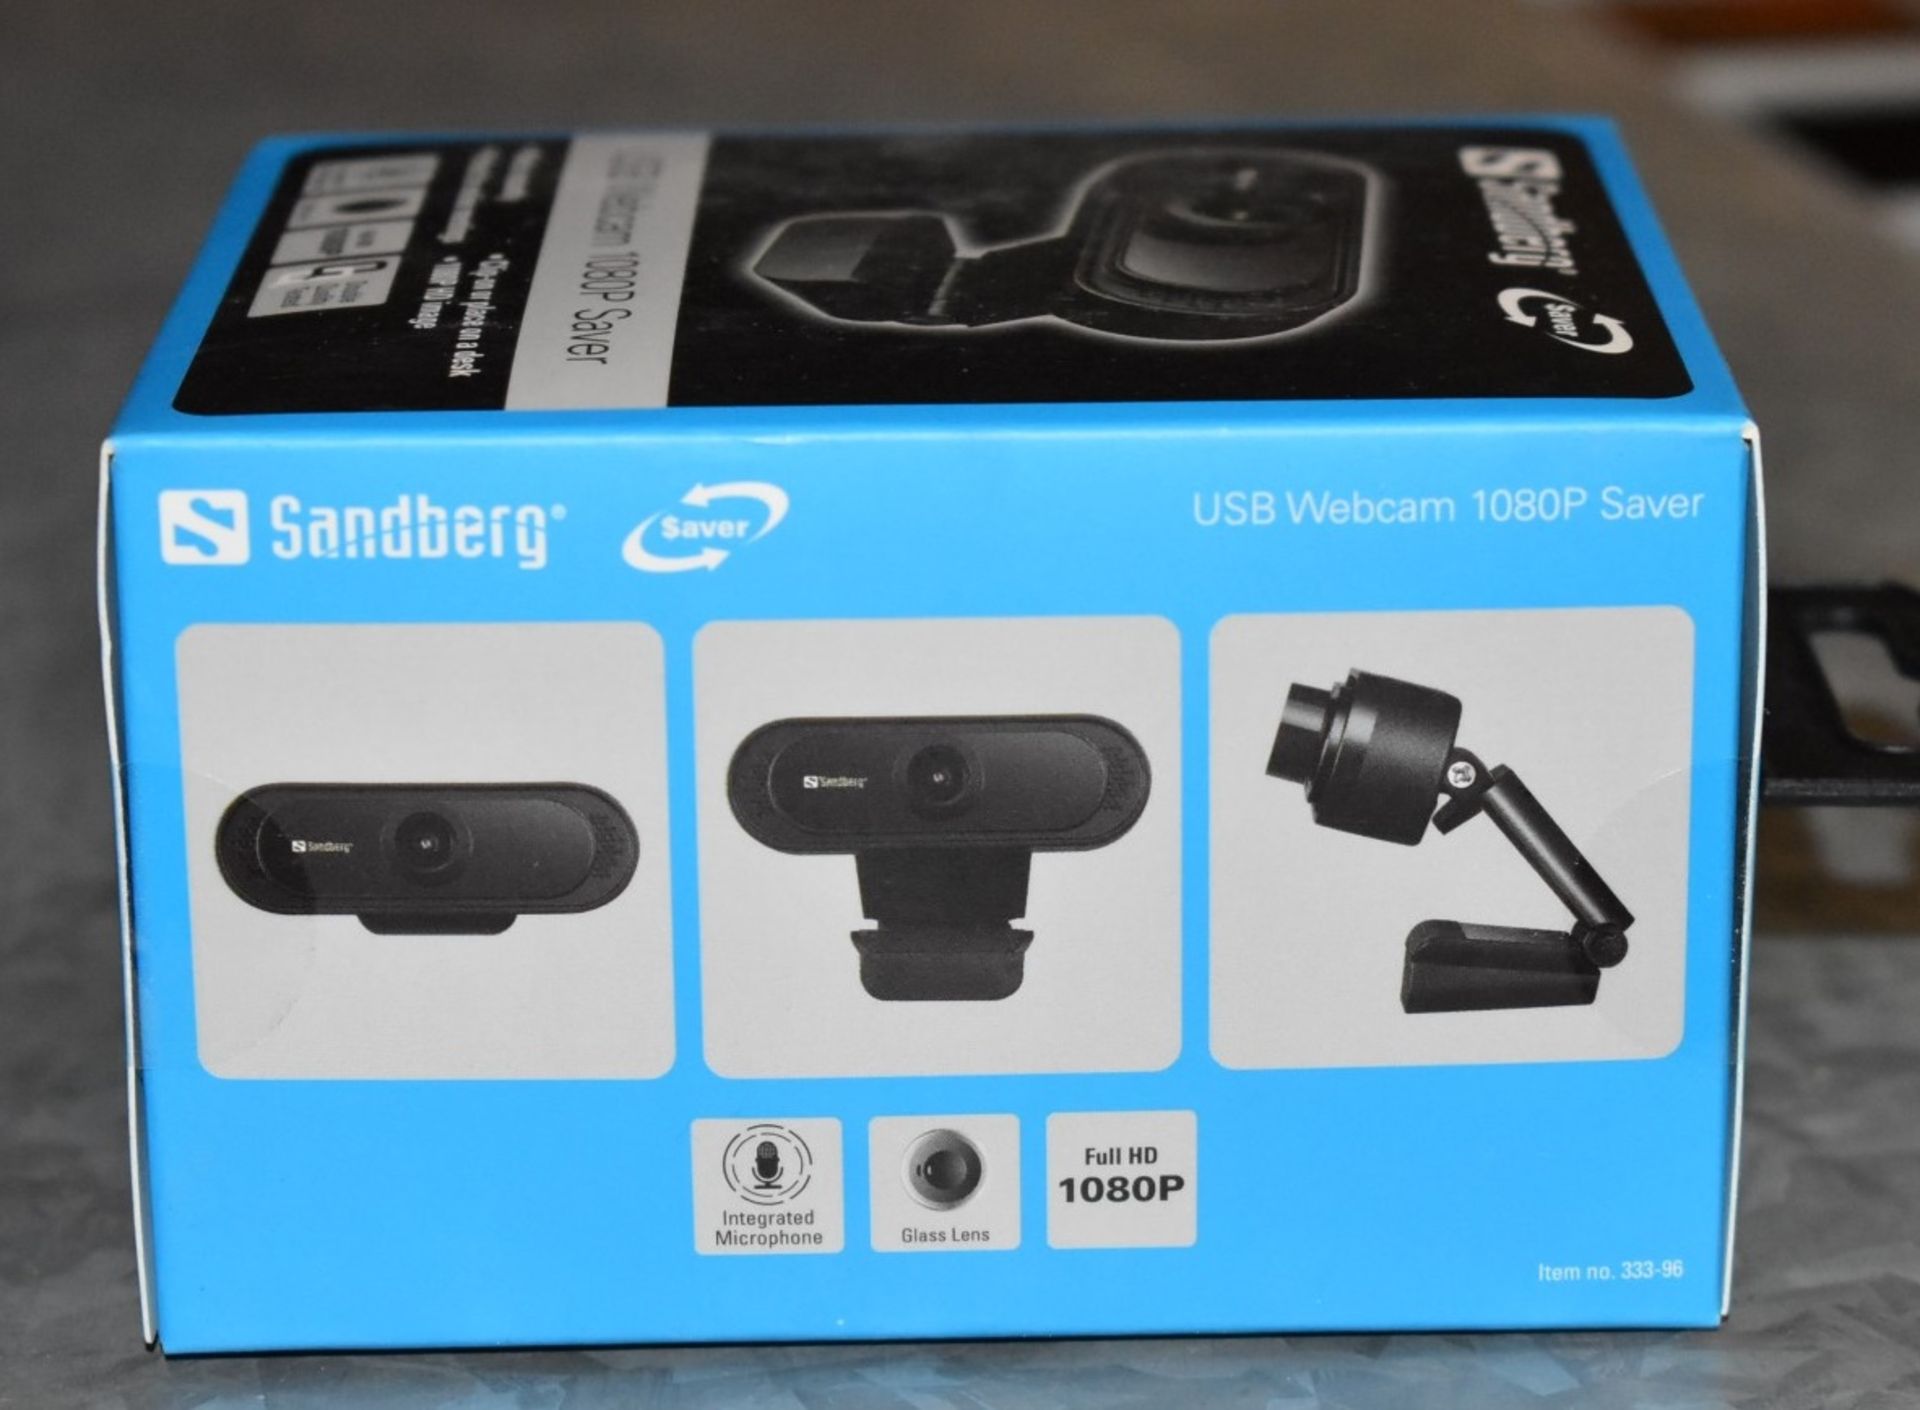 3 x Sandberg USB Full HD 1080p Webcams With Microphone - RRP £34.99 - New Boxed Stock - Ref: AC94 - Image 3 of 3